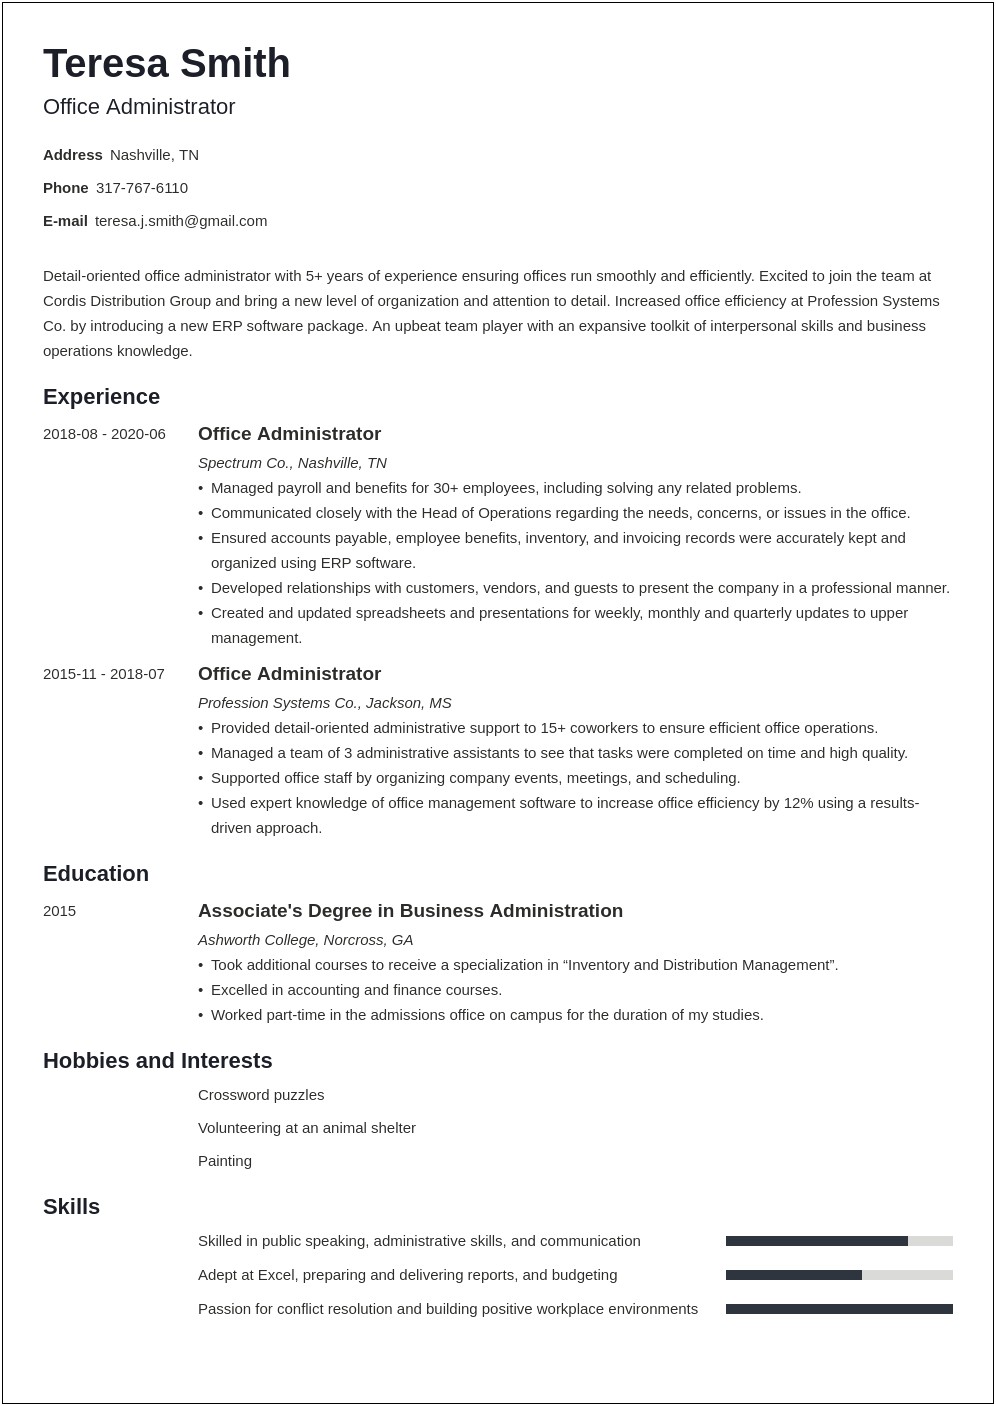 System Administrator Resume 5 Years Experience